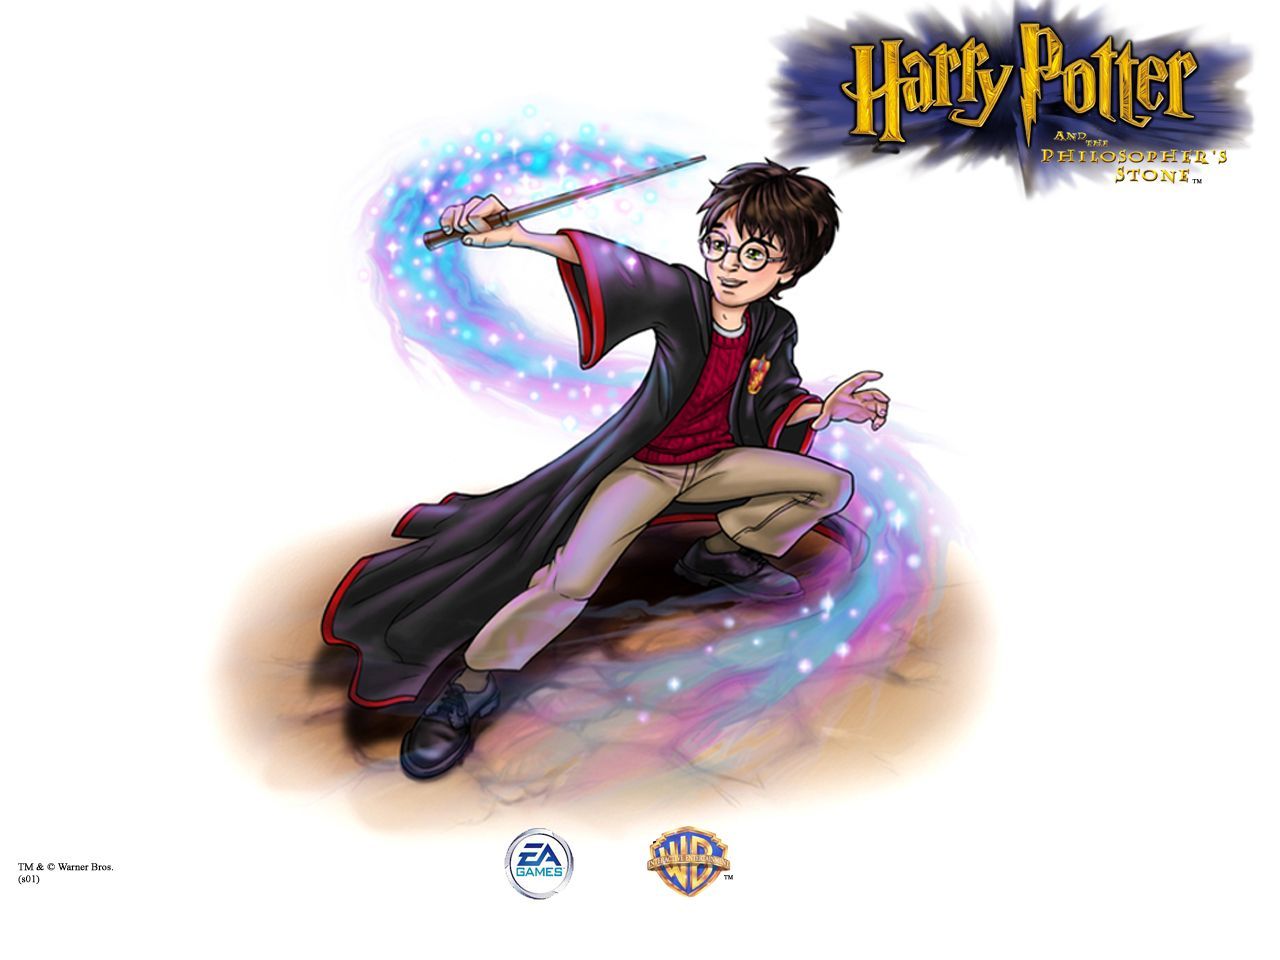 Harry Potter and the Sorcerer's Stone (2001) promotional art